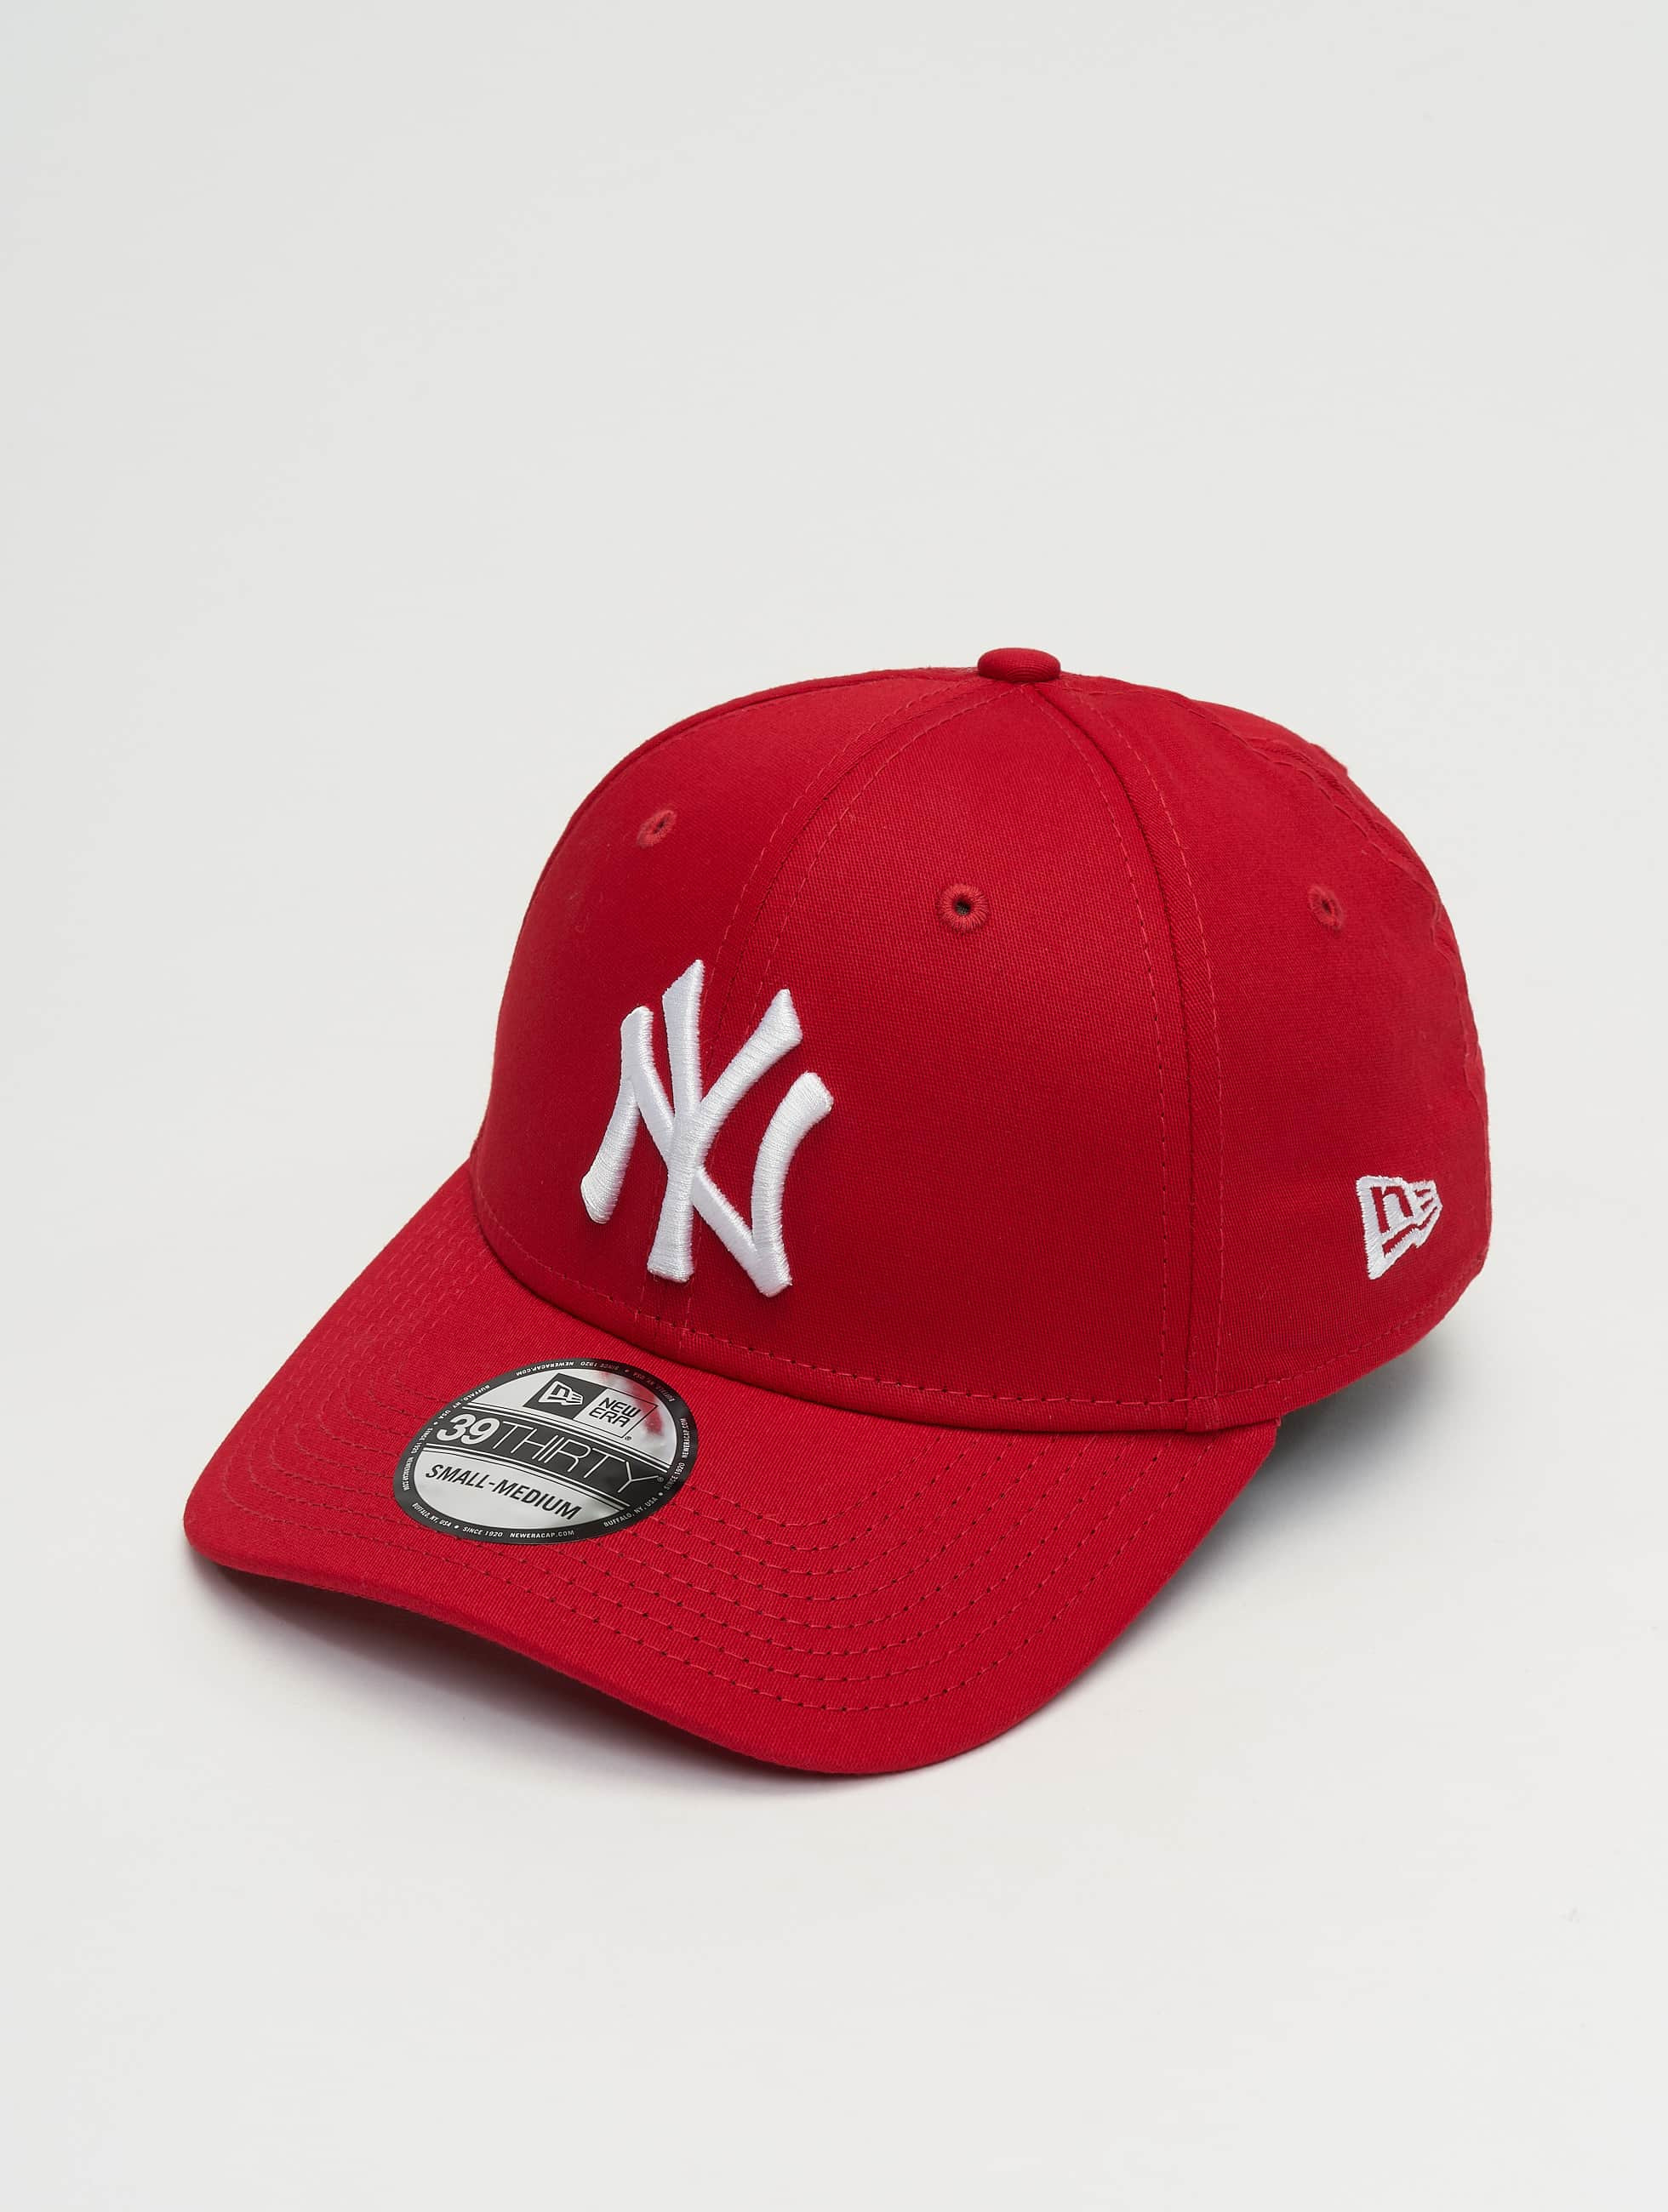 New Era Casquette / Flexfitted League Basic NY Yankees 39Thirty en rouge